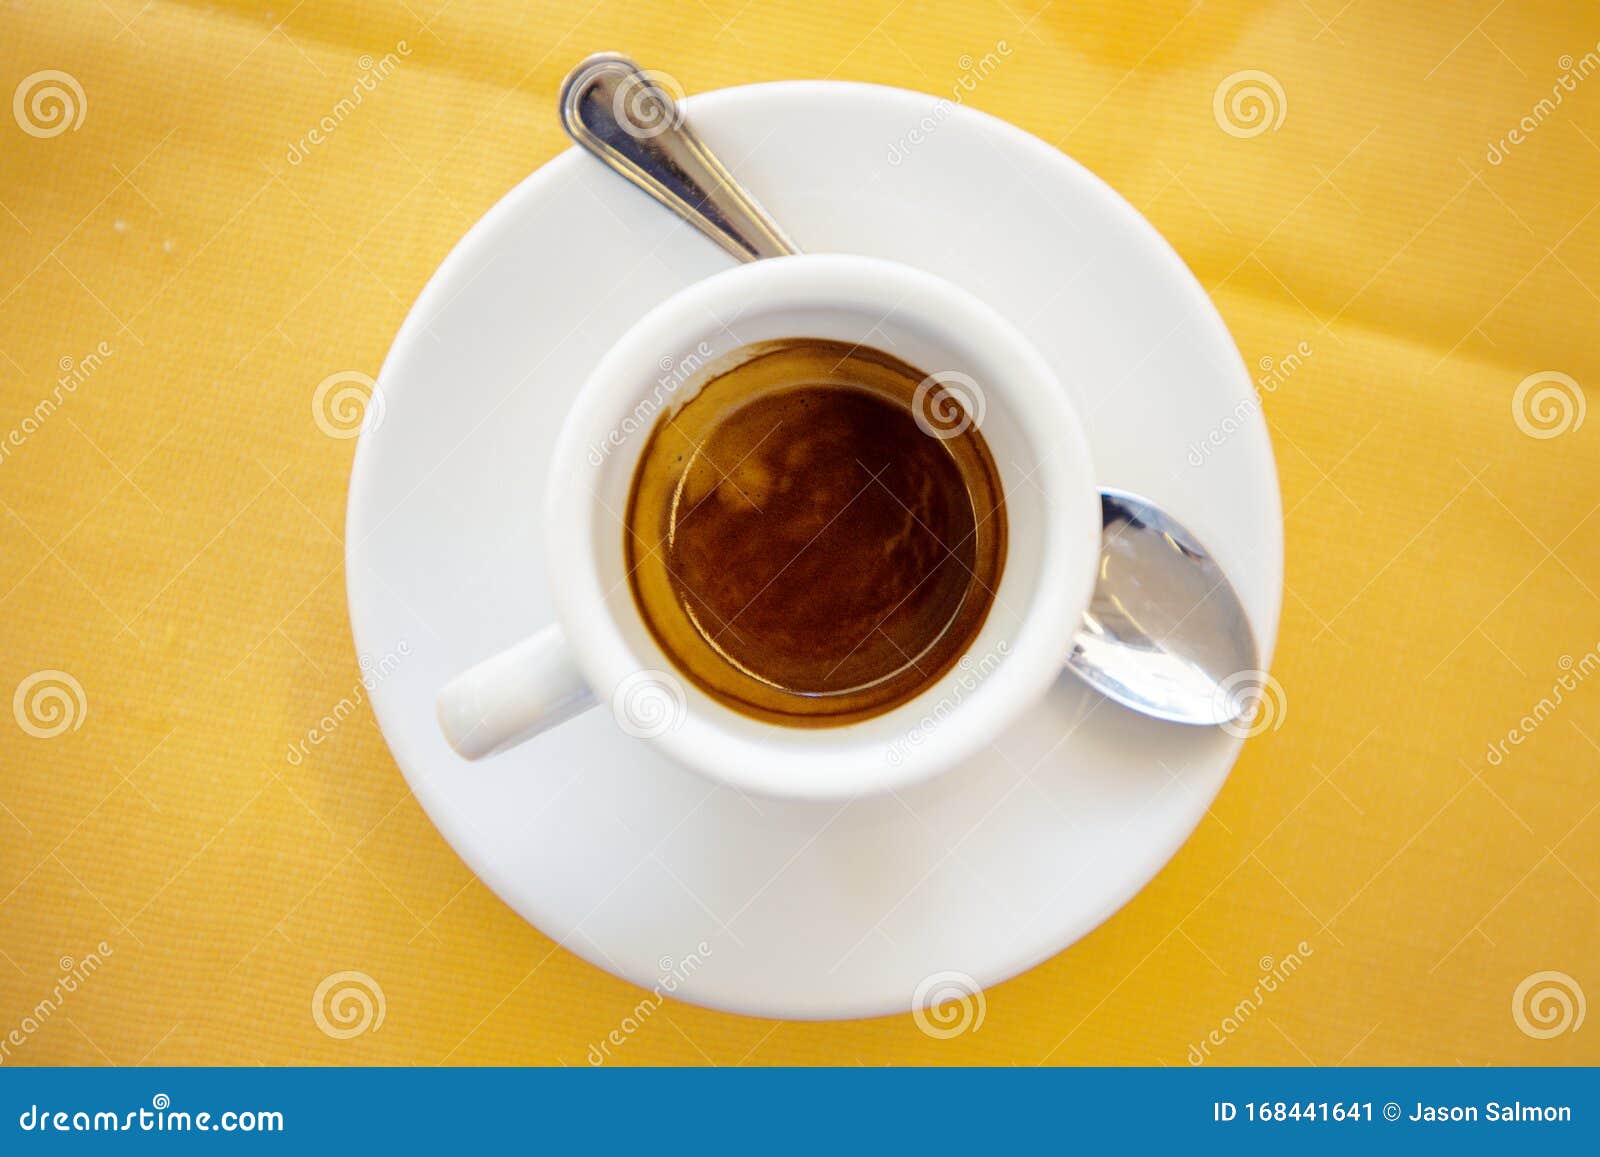 Close-up of espresso coffee in a single shot glass cup with saucer